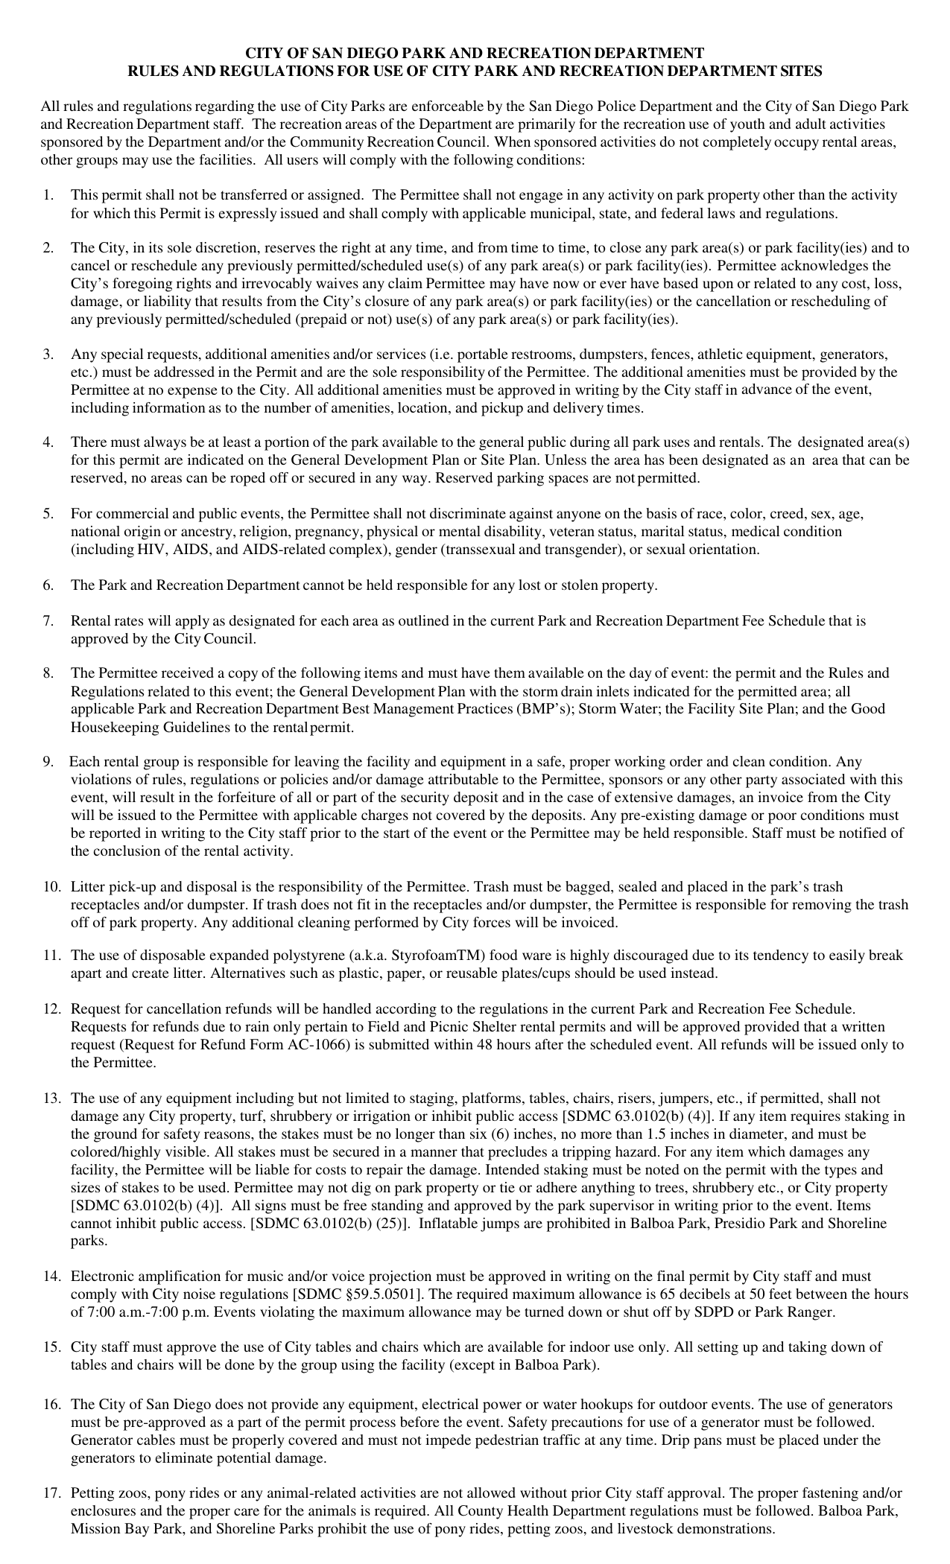 Rules and Regulations for Use of City Park and Recreation Department Sites - City of San Diego, California, Page 1